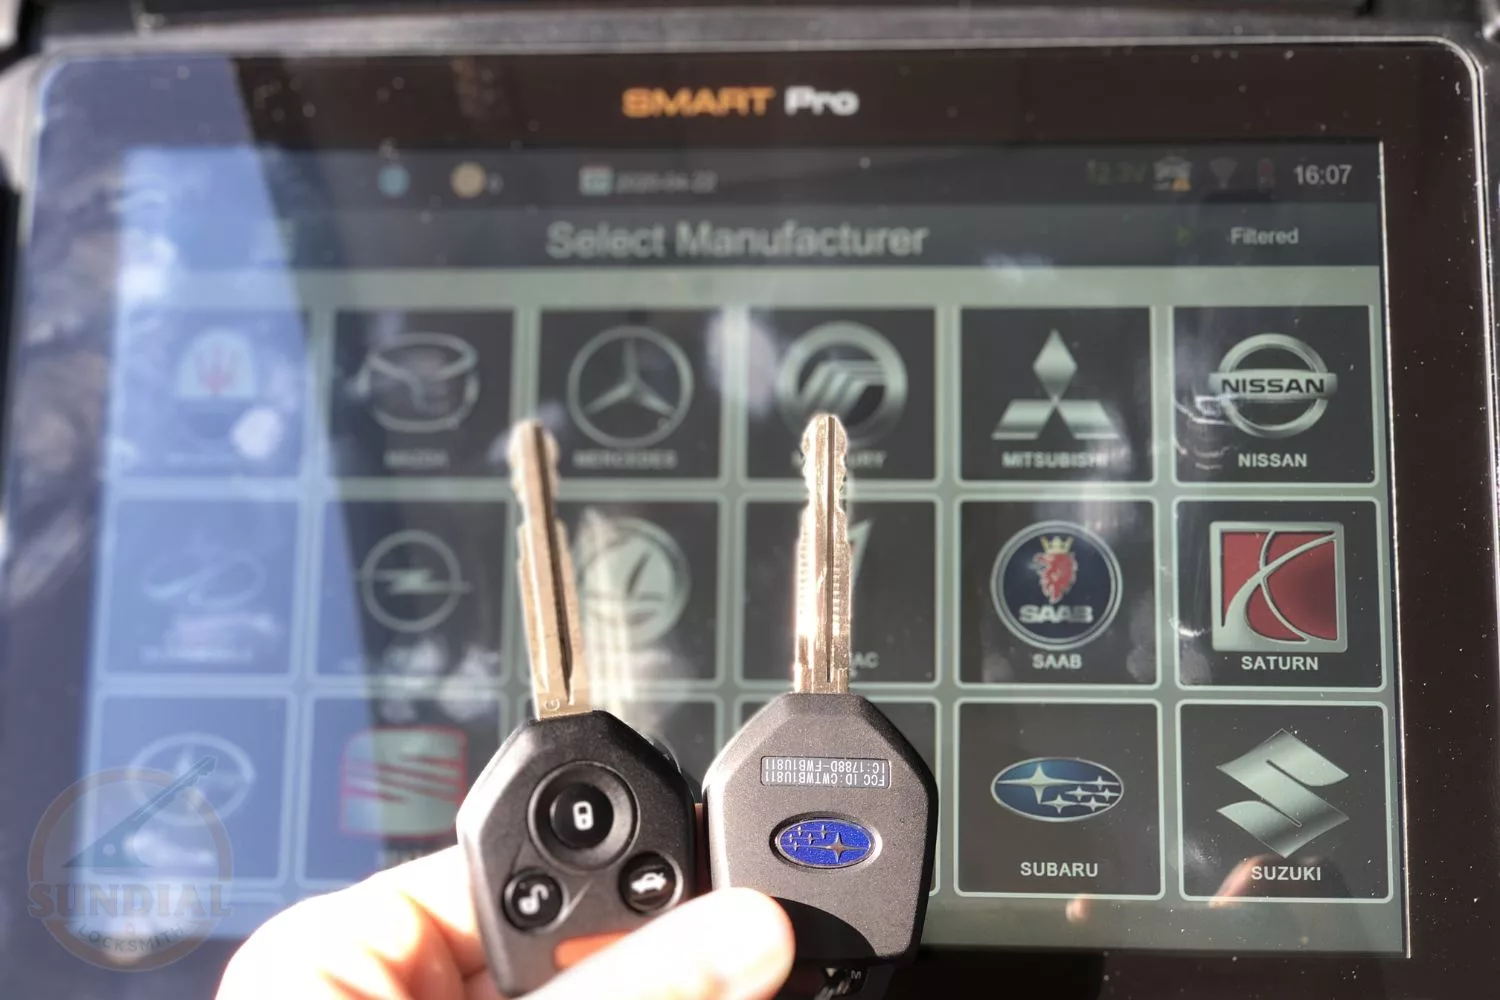 Automotive key programming interface for various manufacturers